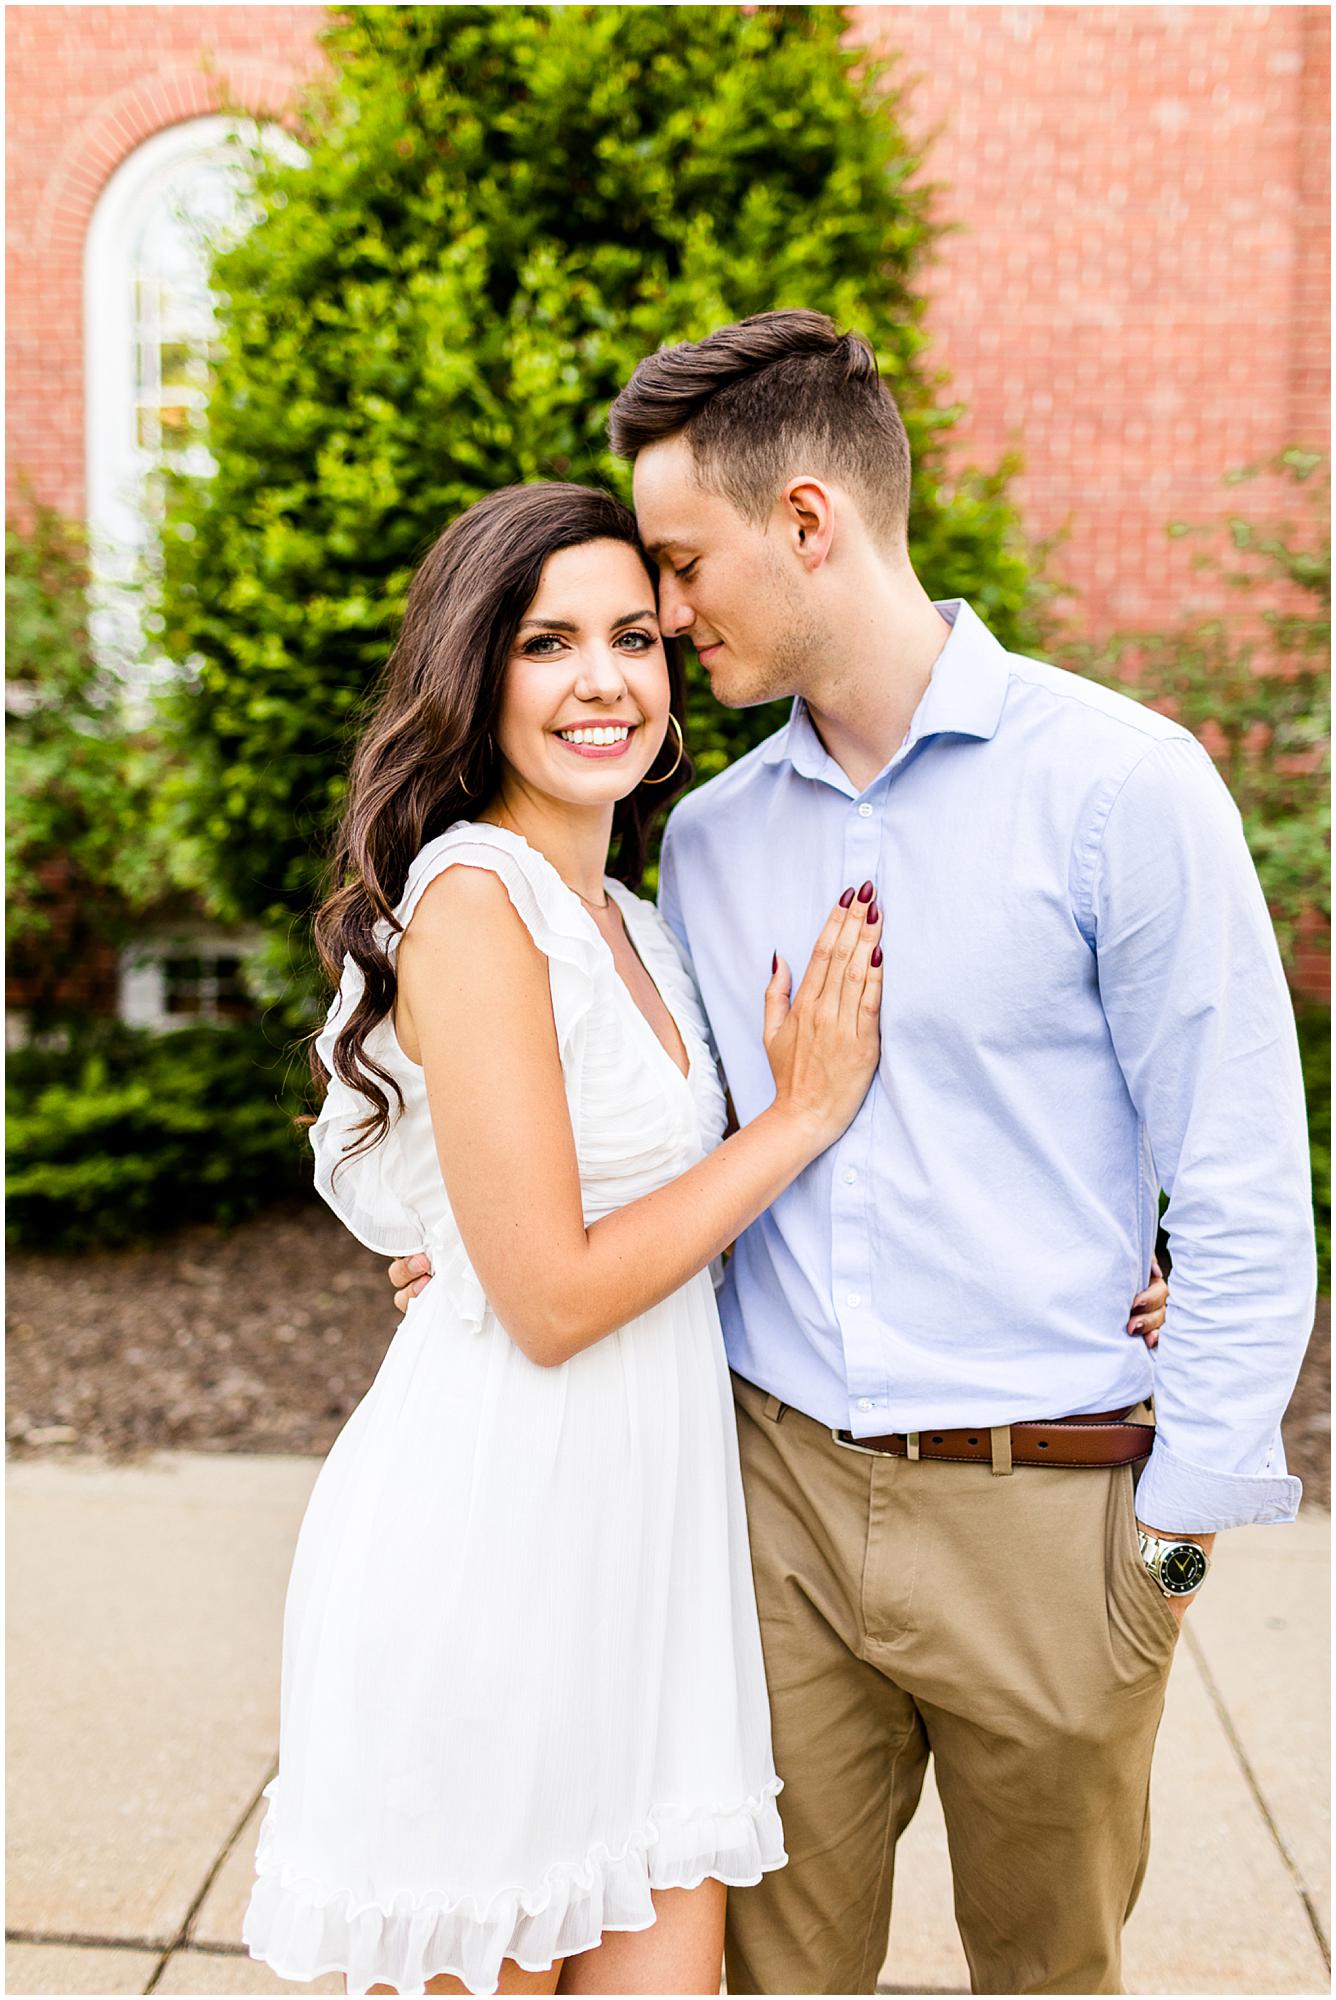 Caitlin-and-Luke-Photography-Illinois-State-University-Proposal-Photos-Normal-IL-engagement-session-Illinois-State-proposal_1061.jpg